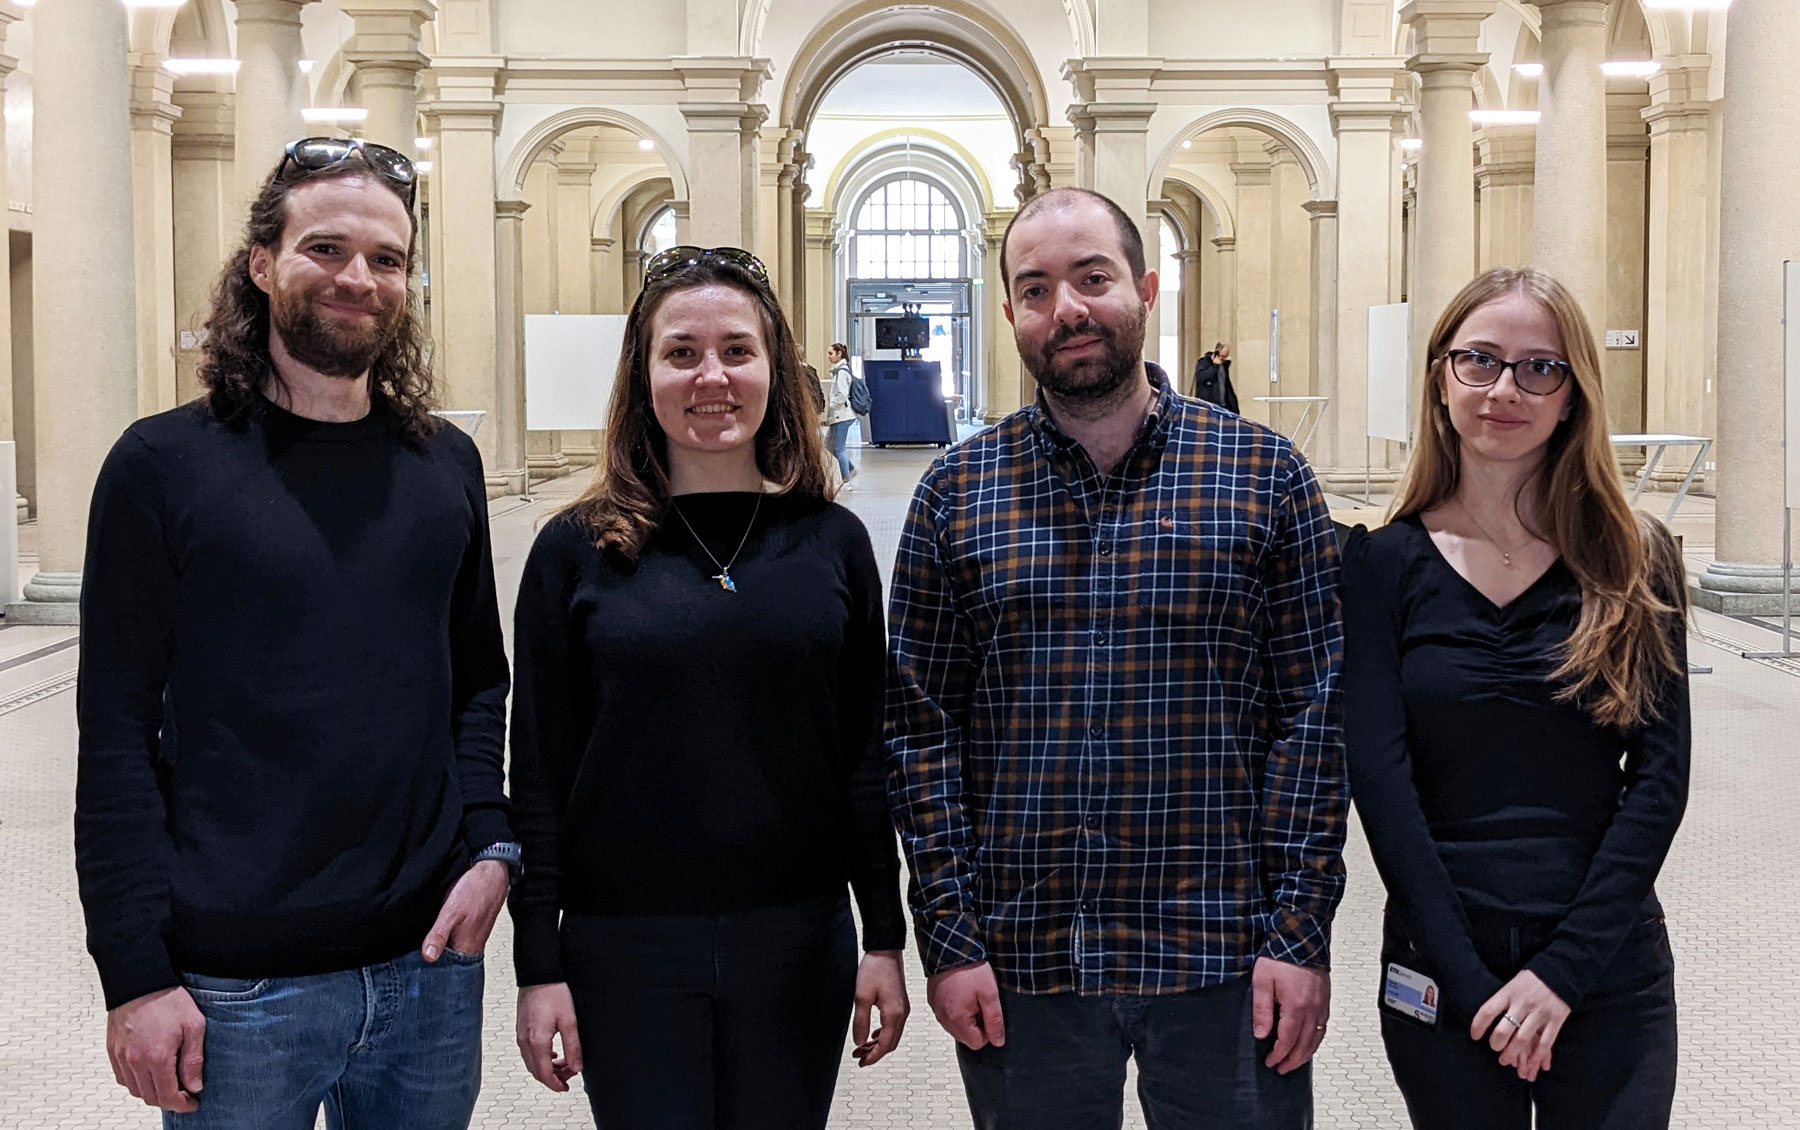 recent picture of our research group. left-to-right: Dr. Enea Maffei, Aisylu Shaidullina, Prof. Dr. Alexander Harms, Dorentina Humolli